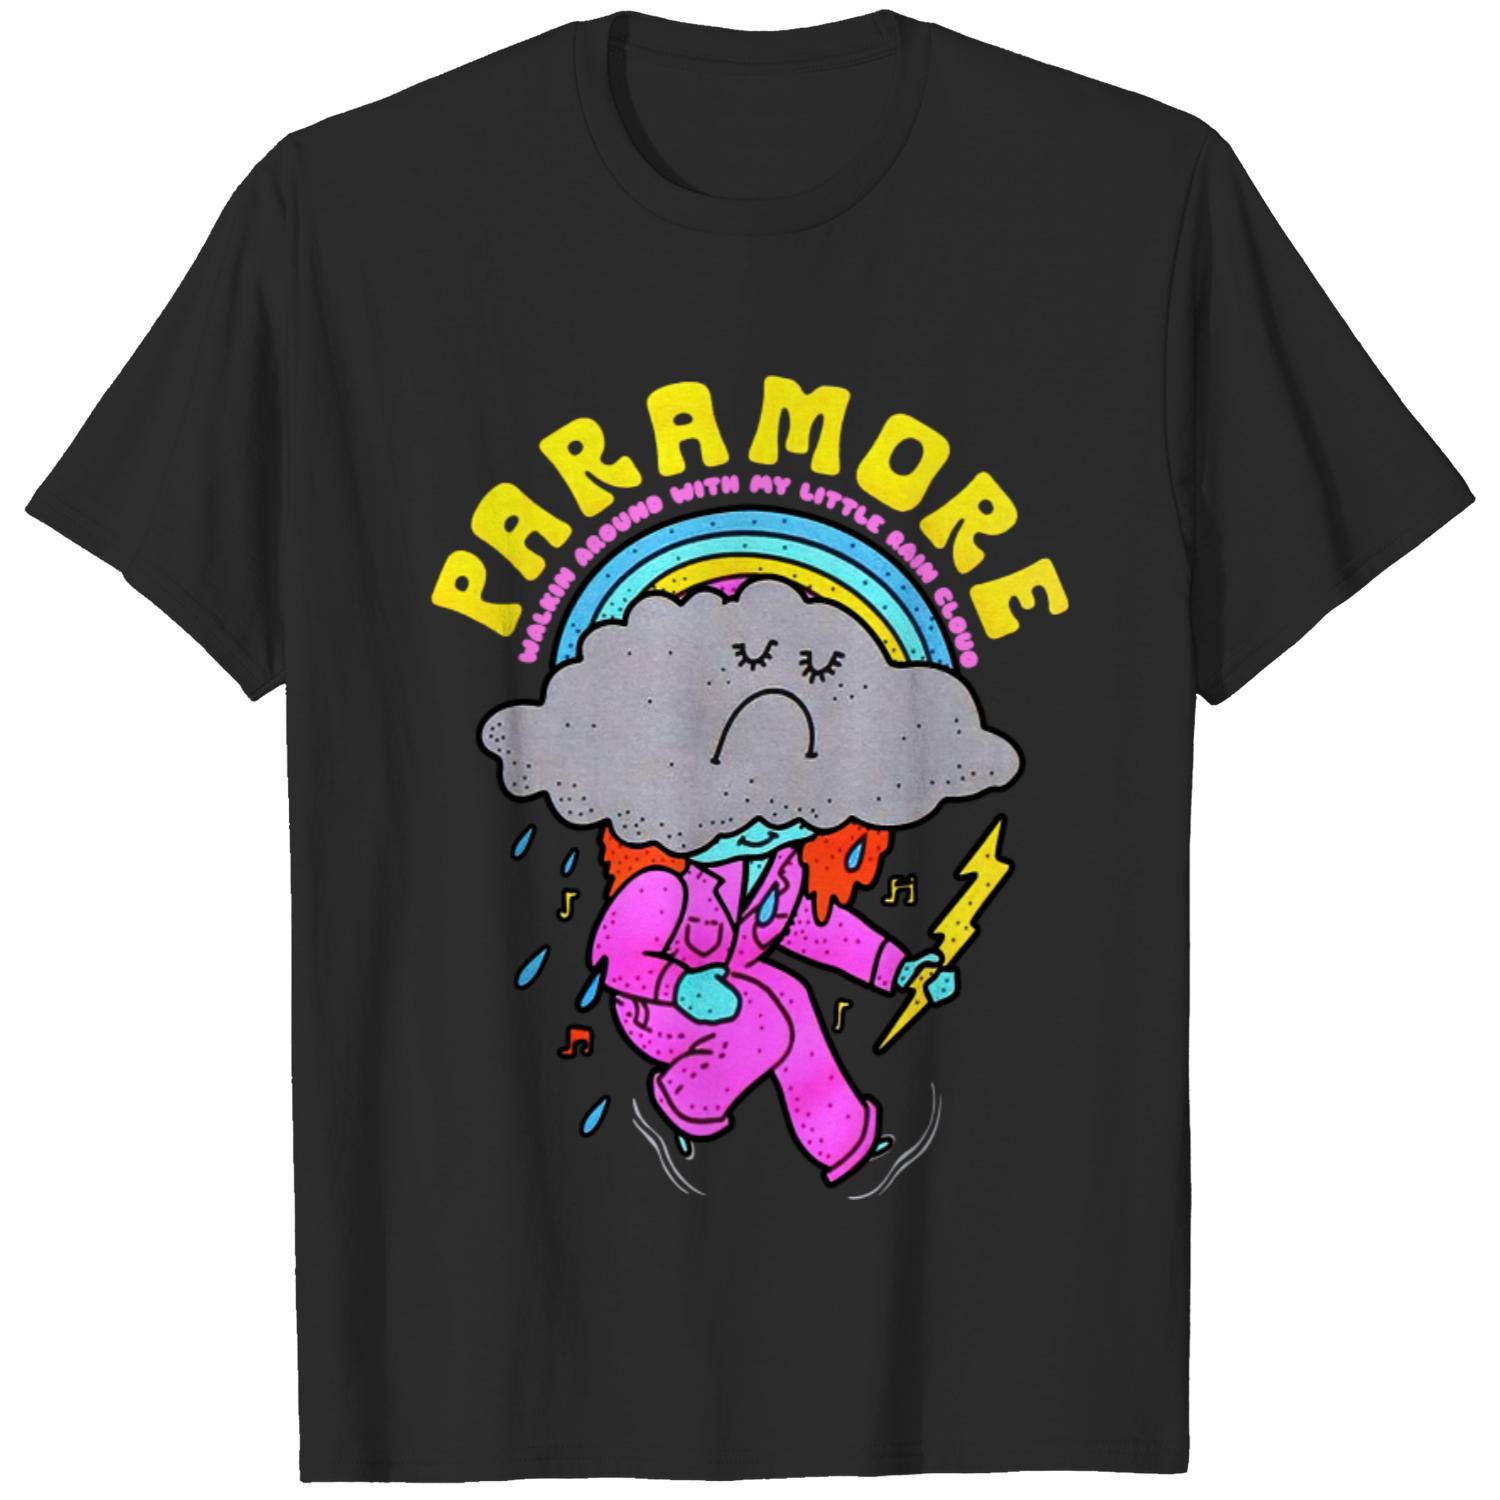 Walking Around With My Little Rain Cloud Paramore, Paramore Shirt For Fan -  Ink In Action